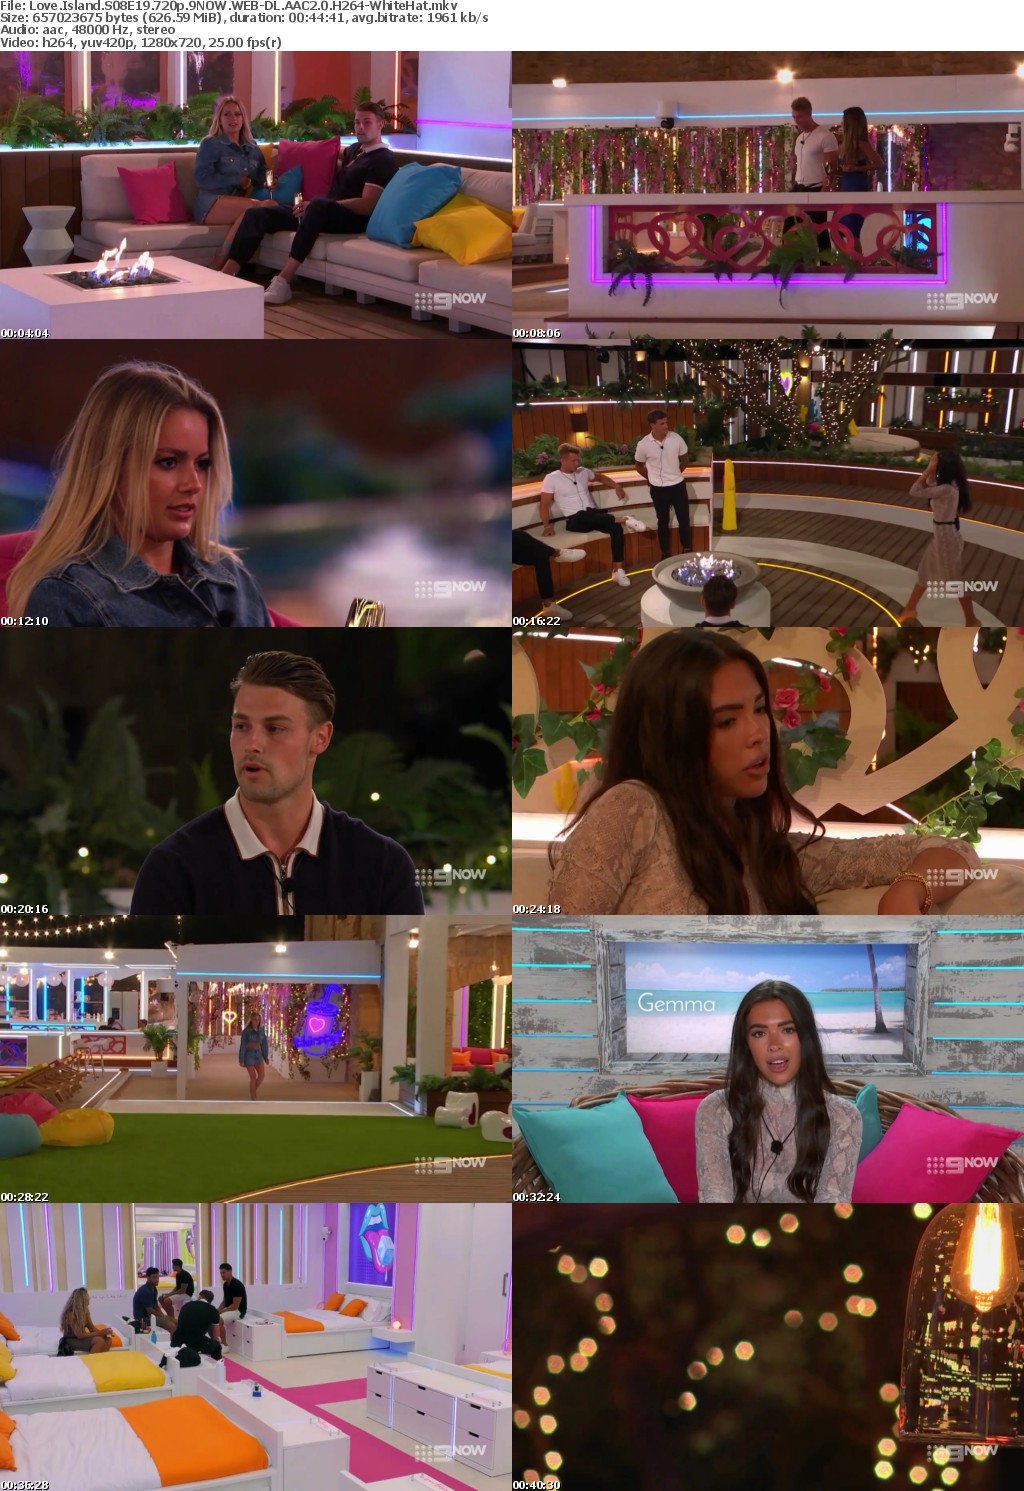 Love Island S08E19 720p 9NOW WEB-DL AAC2 0 H264-WhiteHat